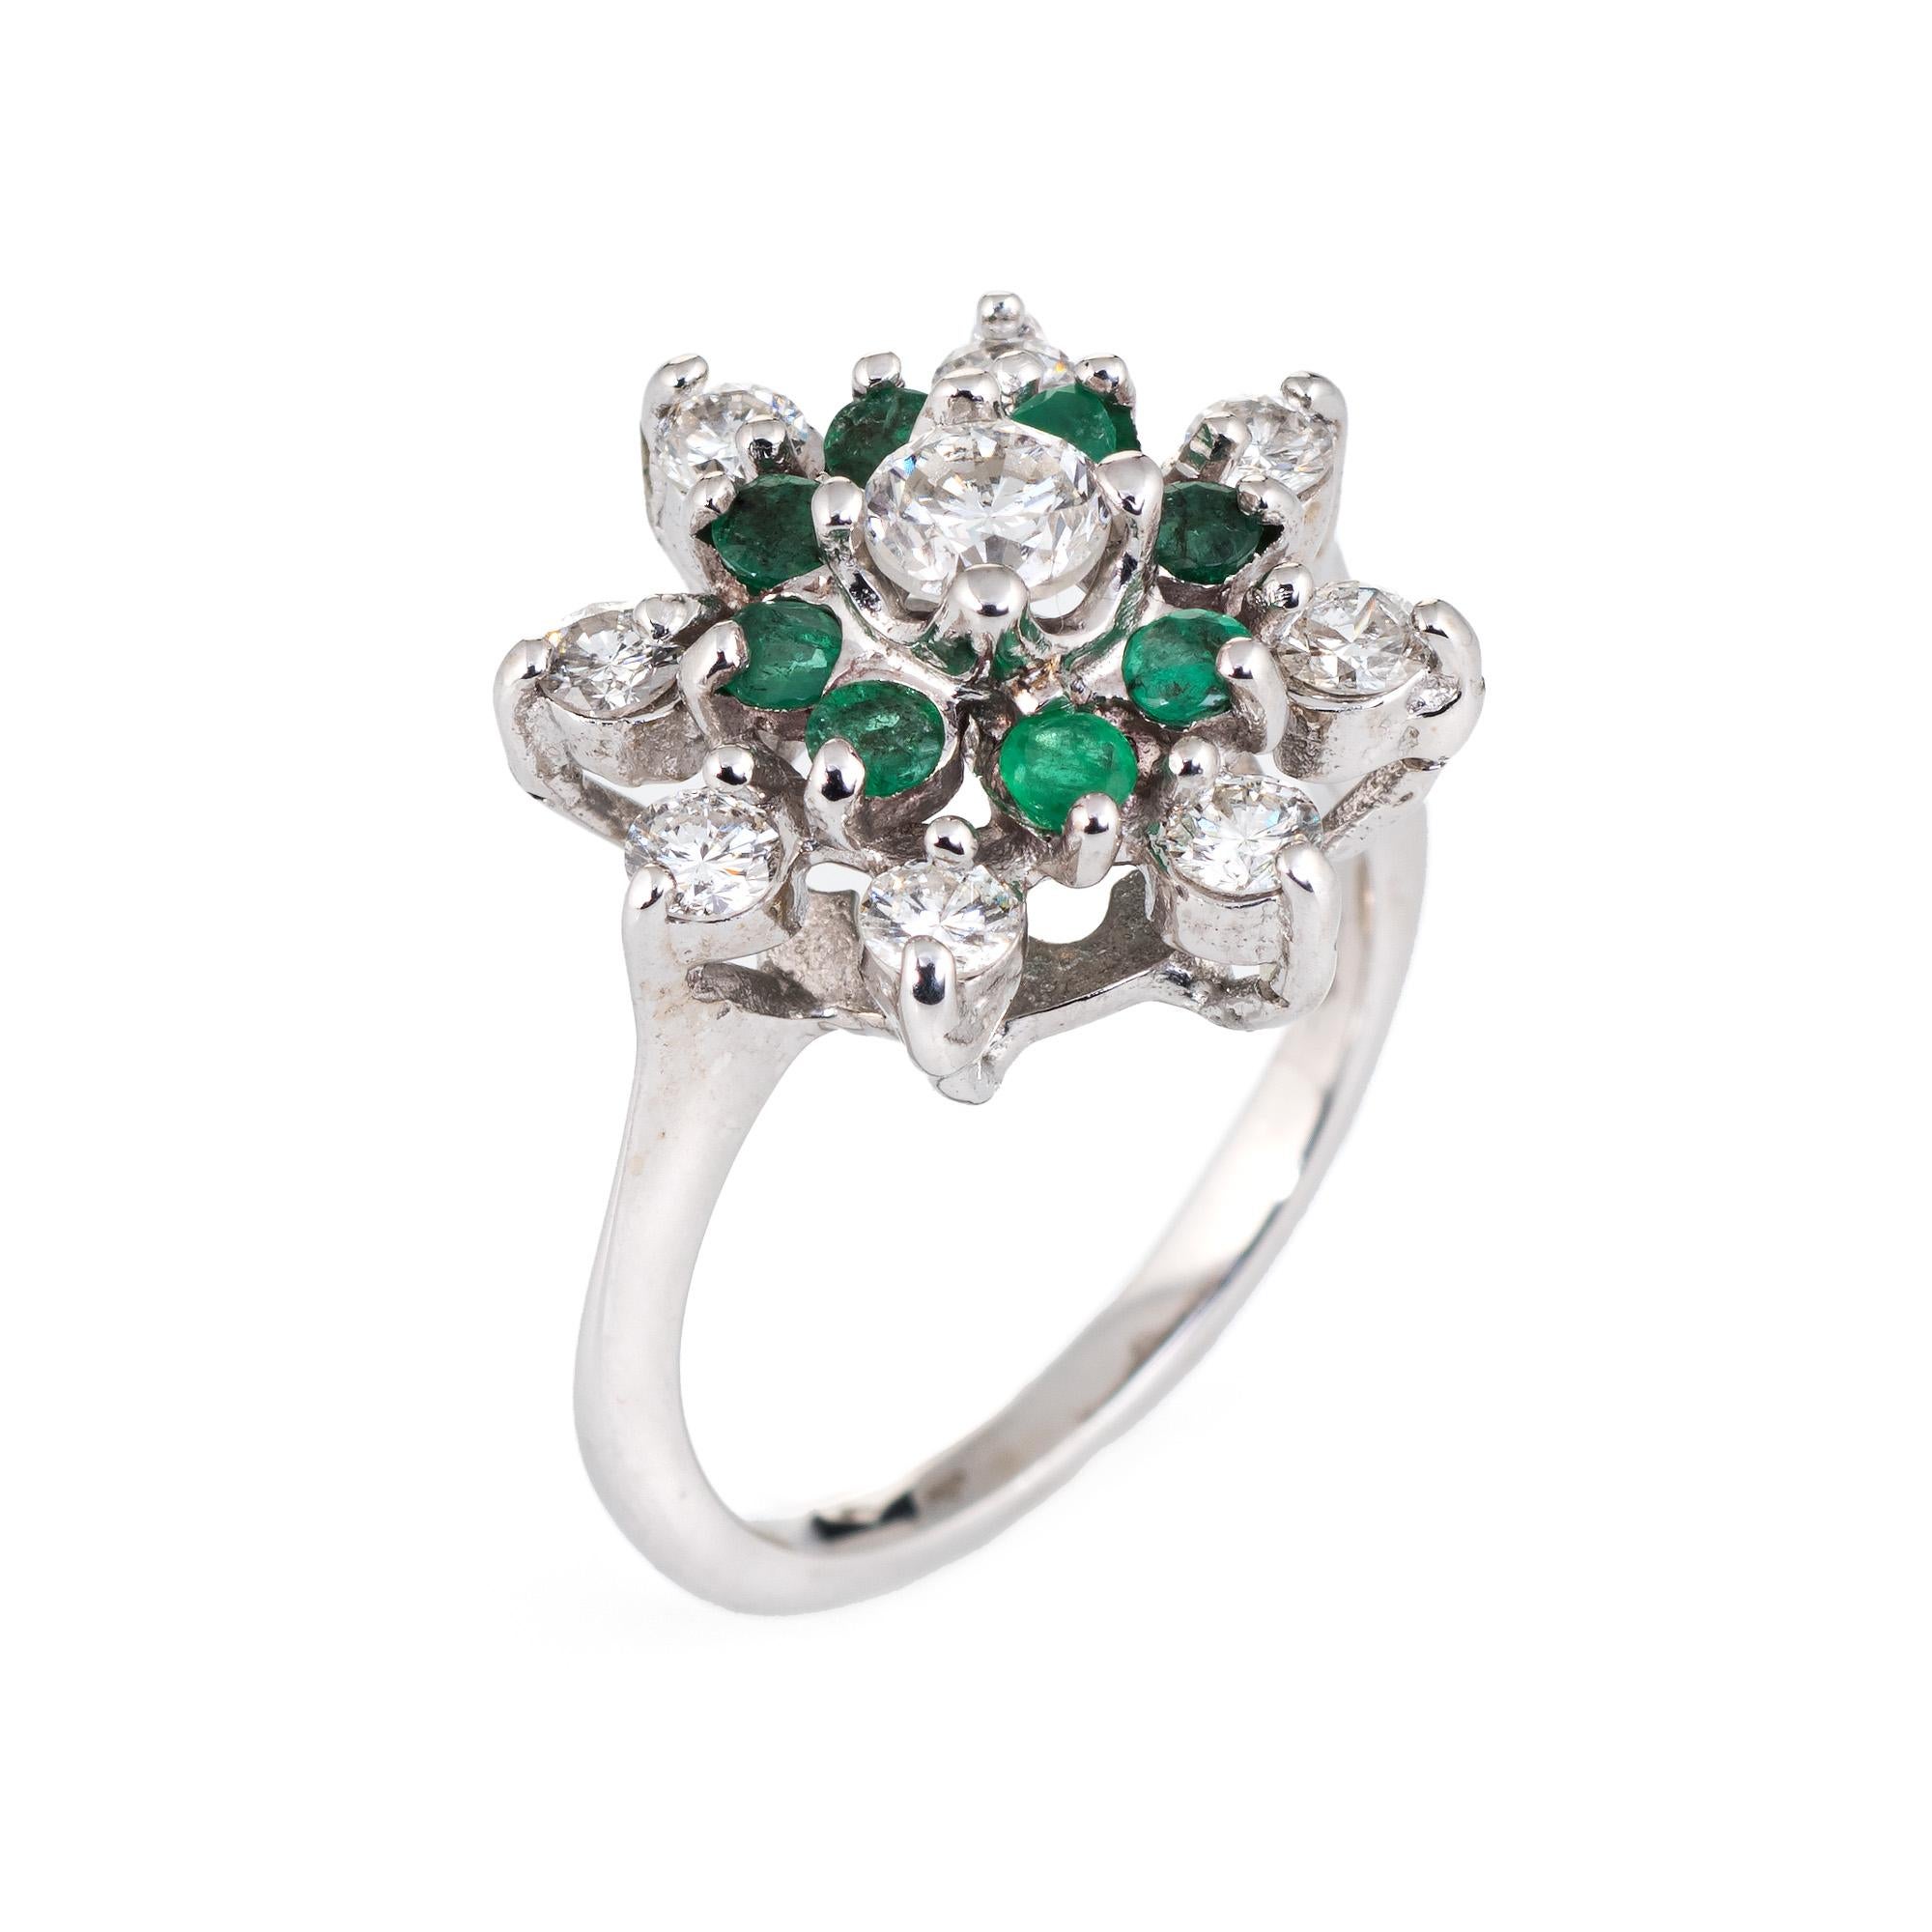 Elegant vintage emerald & diamond ring (circa 1960s to 1970s), crafted in 14 karat white gold. 

Centrally mounted round brilliant cut diamond is estimated at 0.25 carats, accented with a further 8 estimated 0.05 carat diamonds. The total diamond